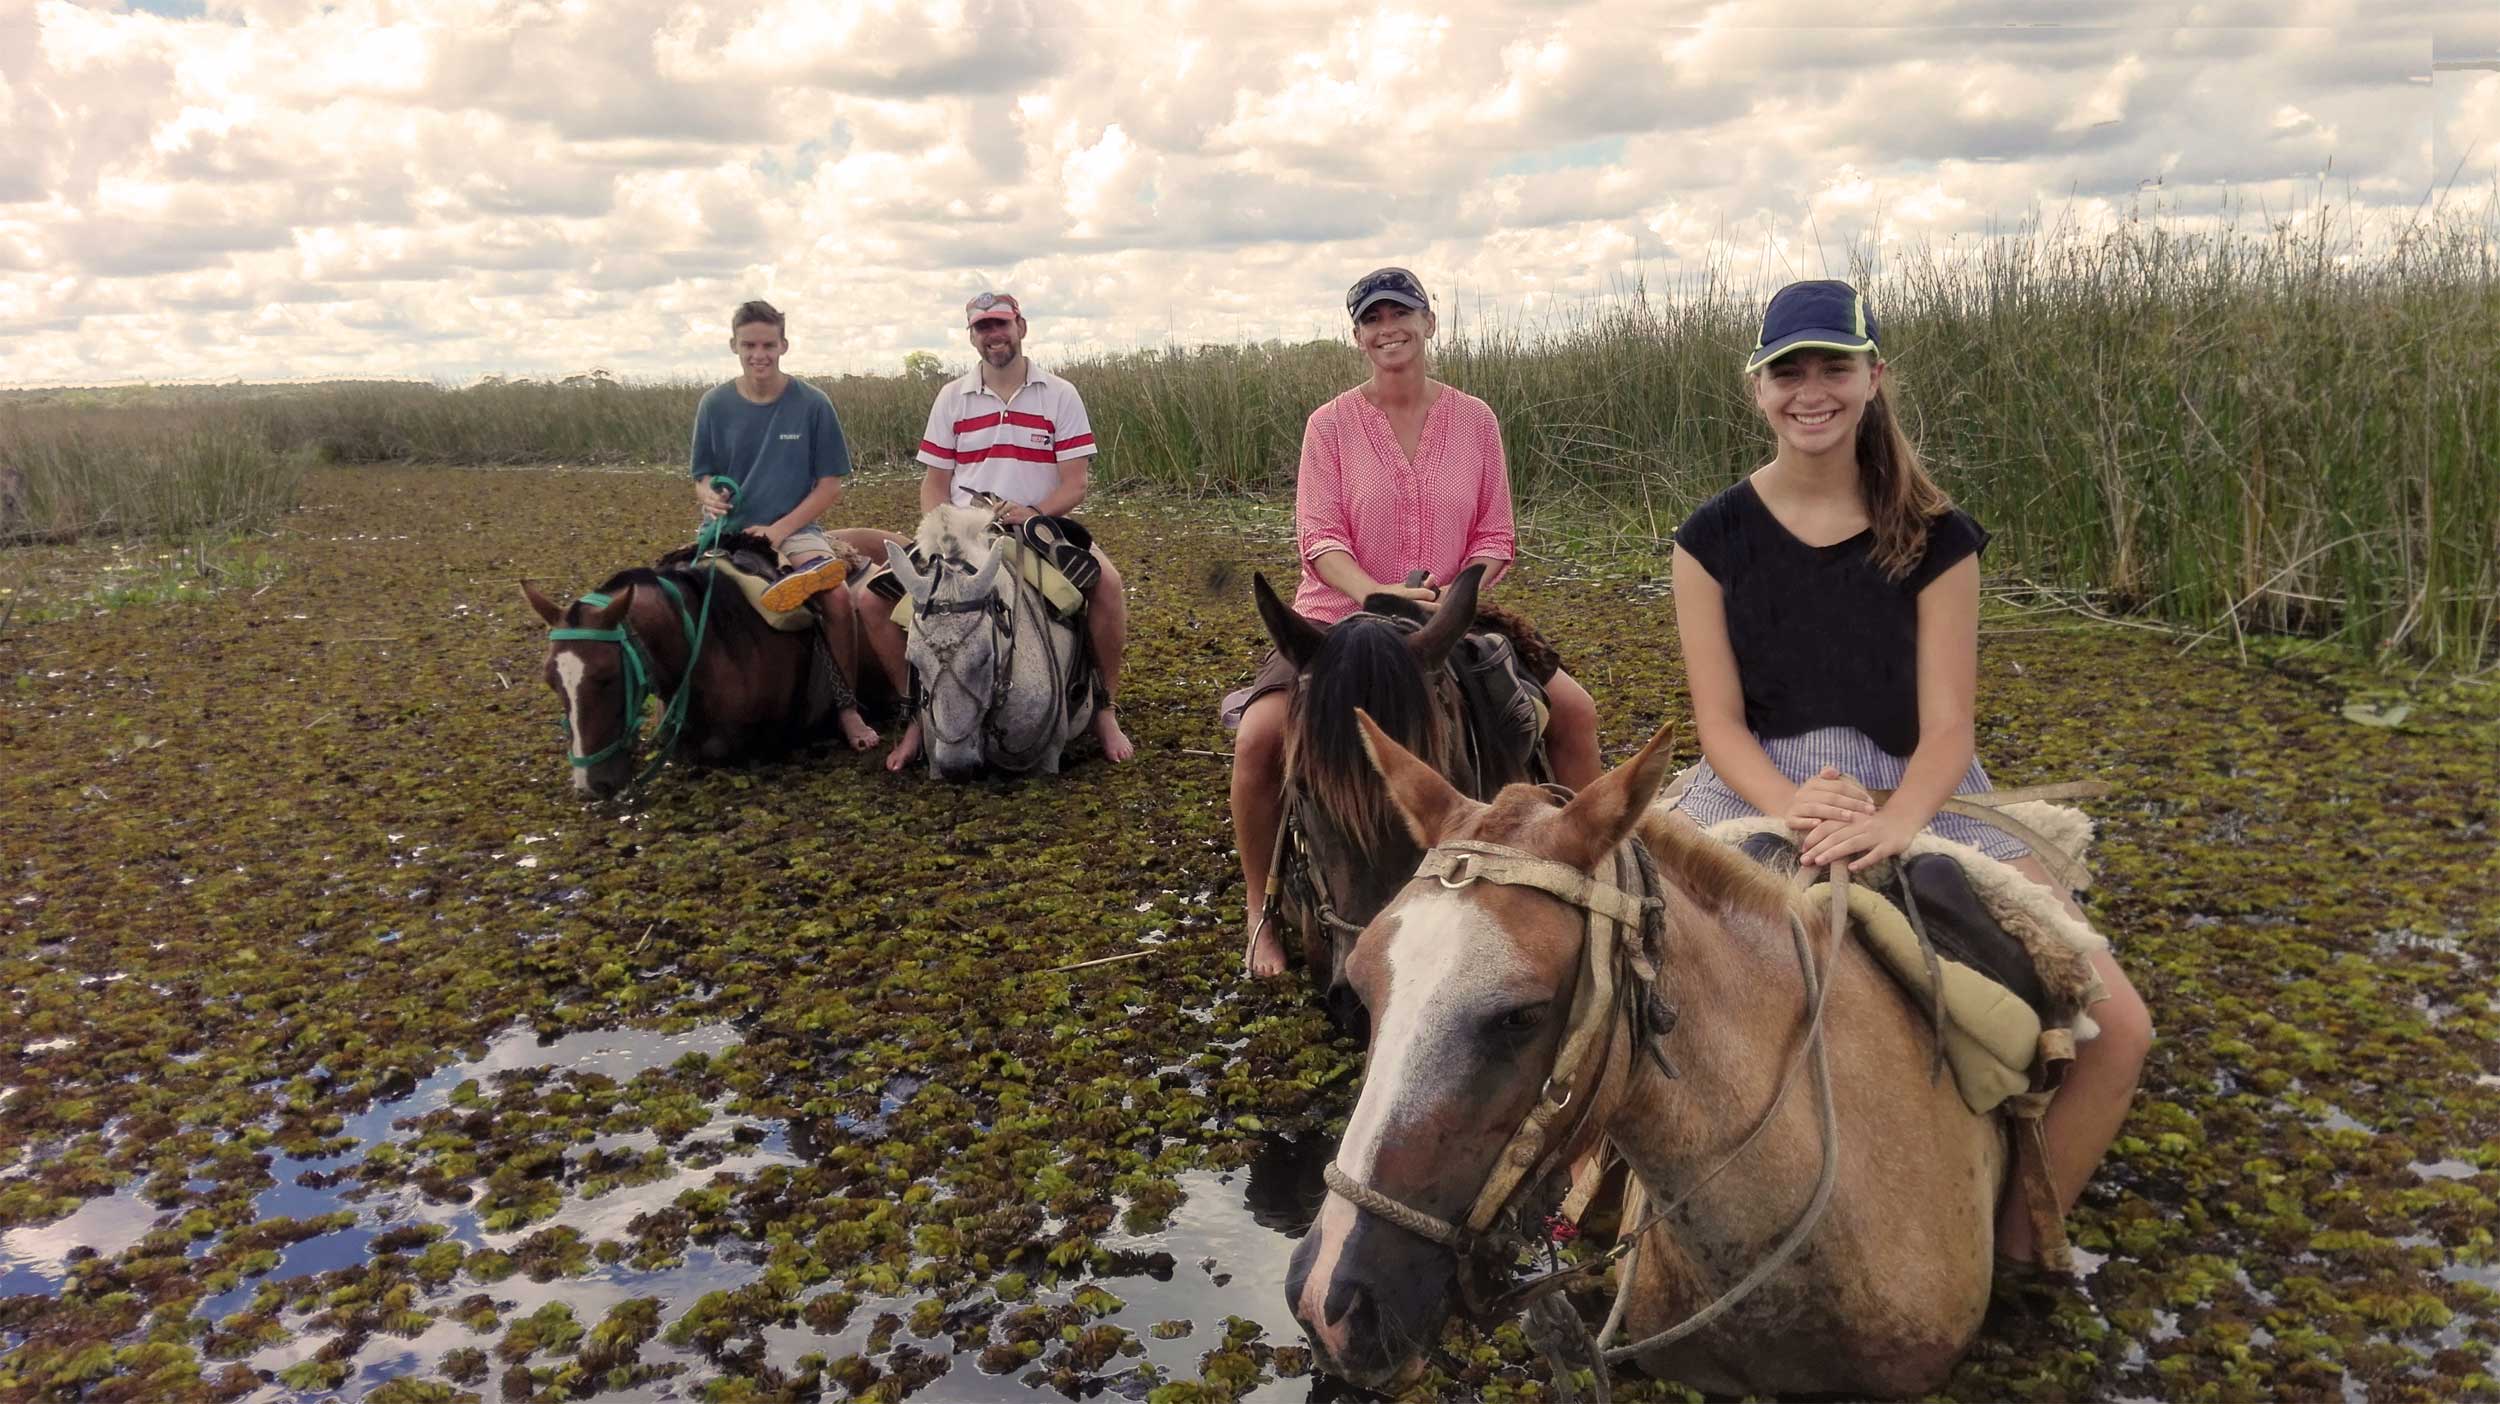 Family of four on horseback in water hyacinth-strewn waterway, Argentina